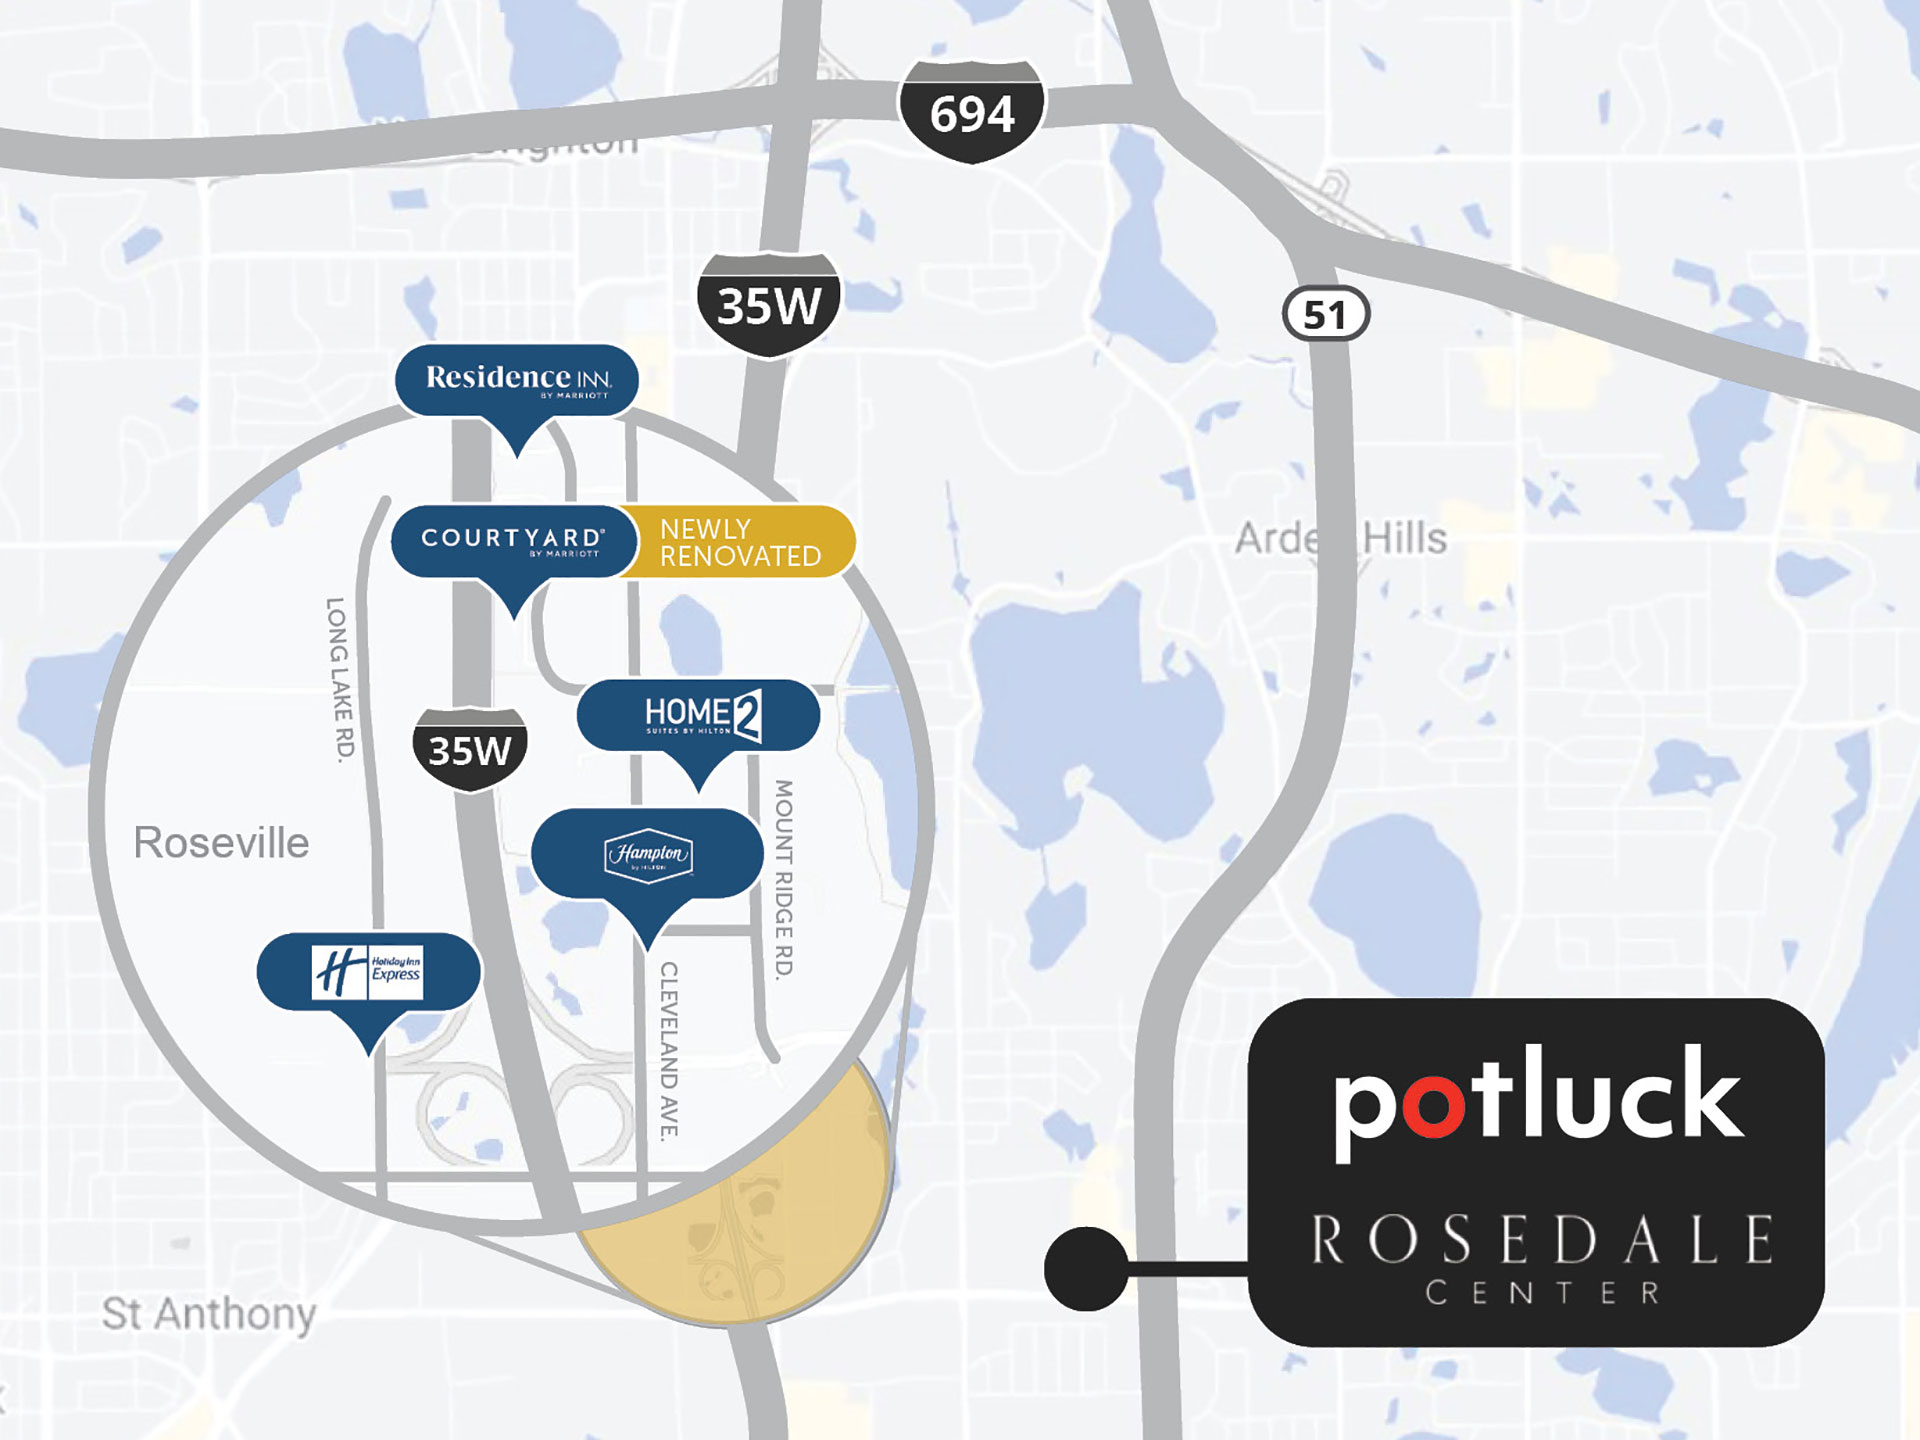 Hotels near Potluck and Rosedale Center